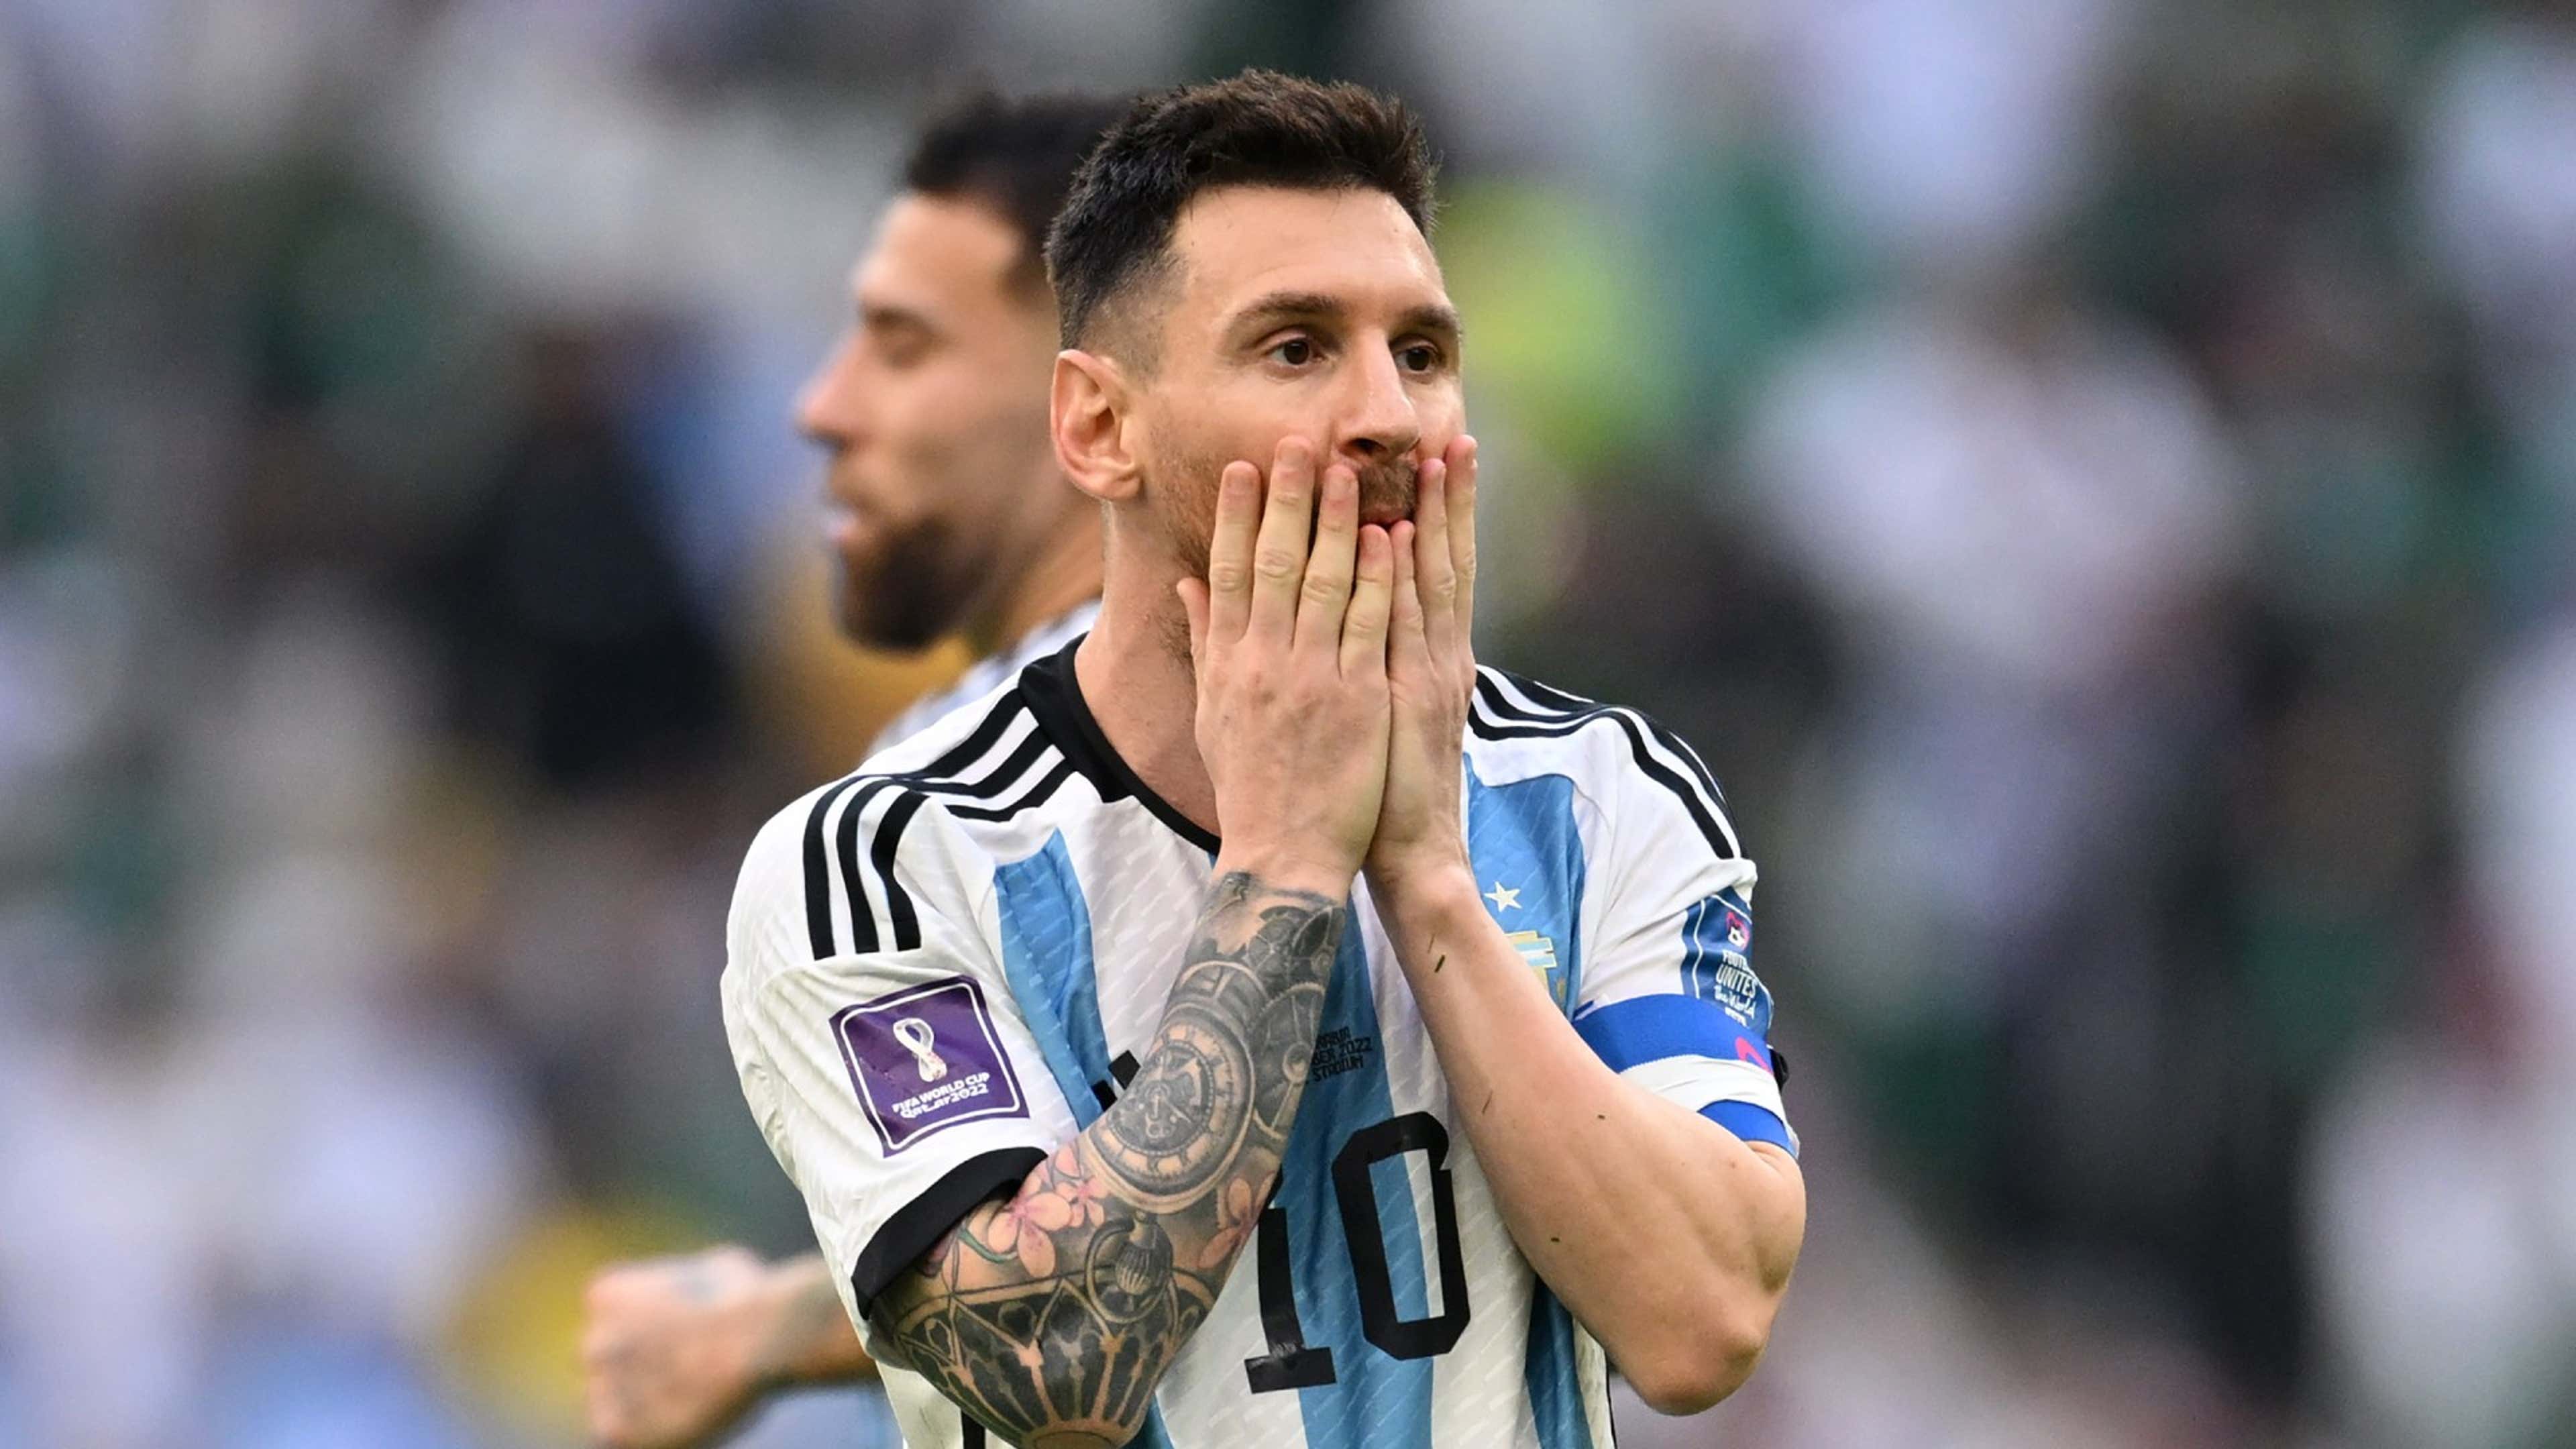 Lionel Messi wins World Cup; Argentina gear just dropped 